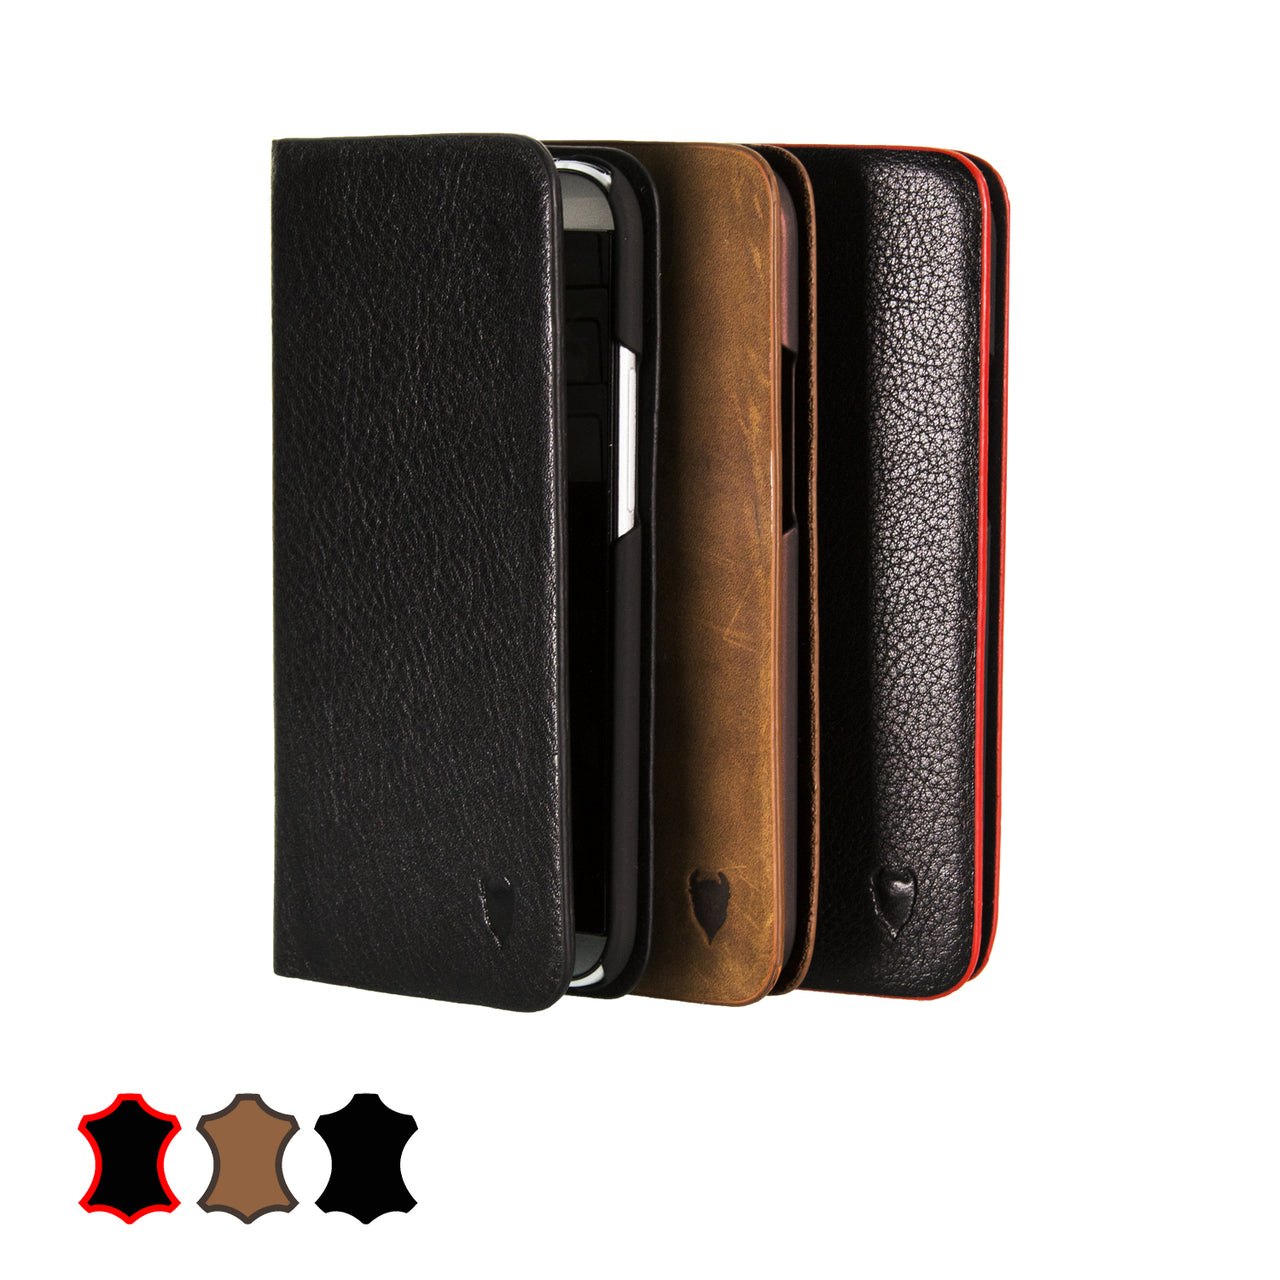 HTC One 2014 (M8) Genuine Leather Case with Stand | Artisancover